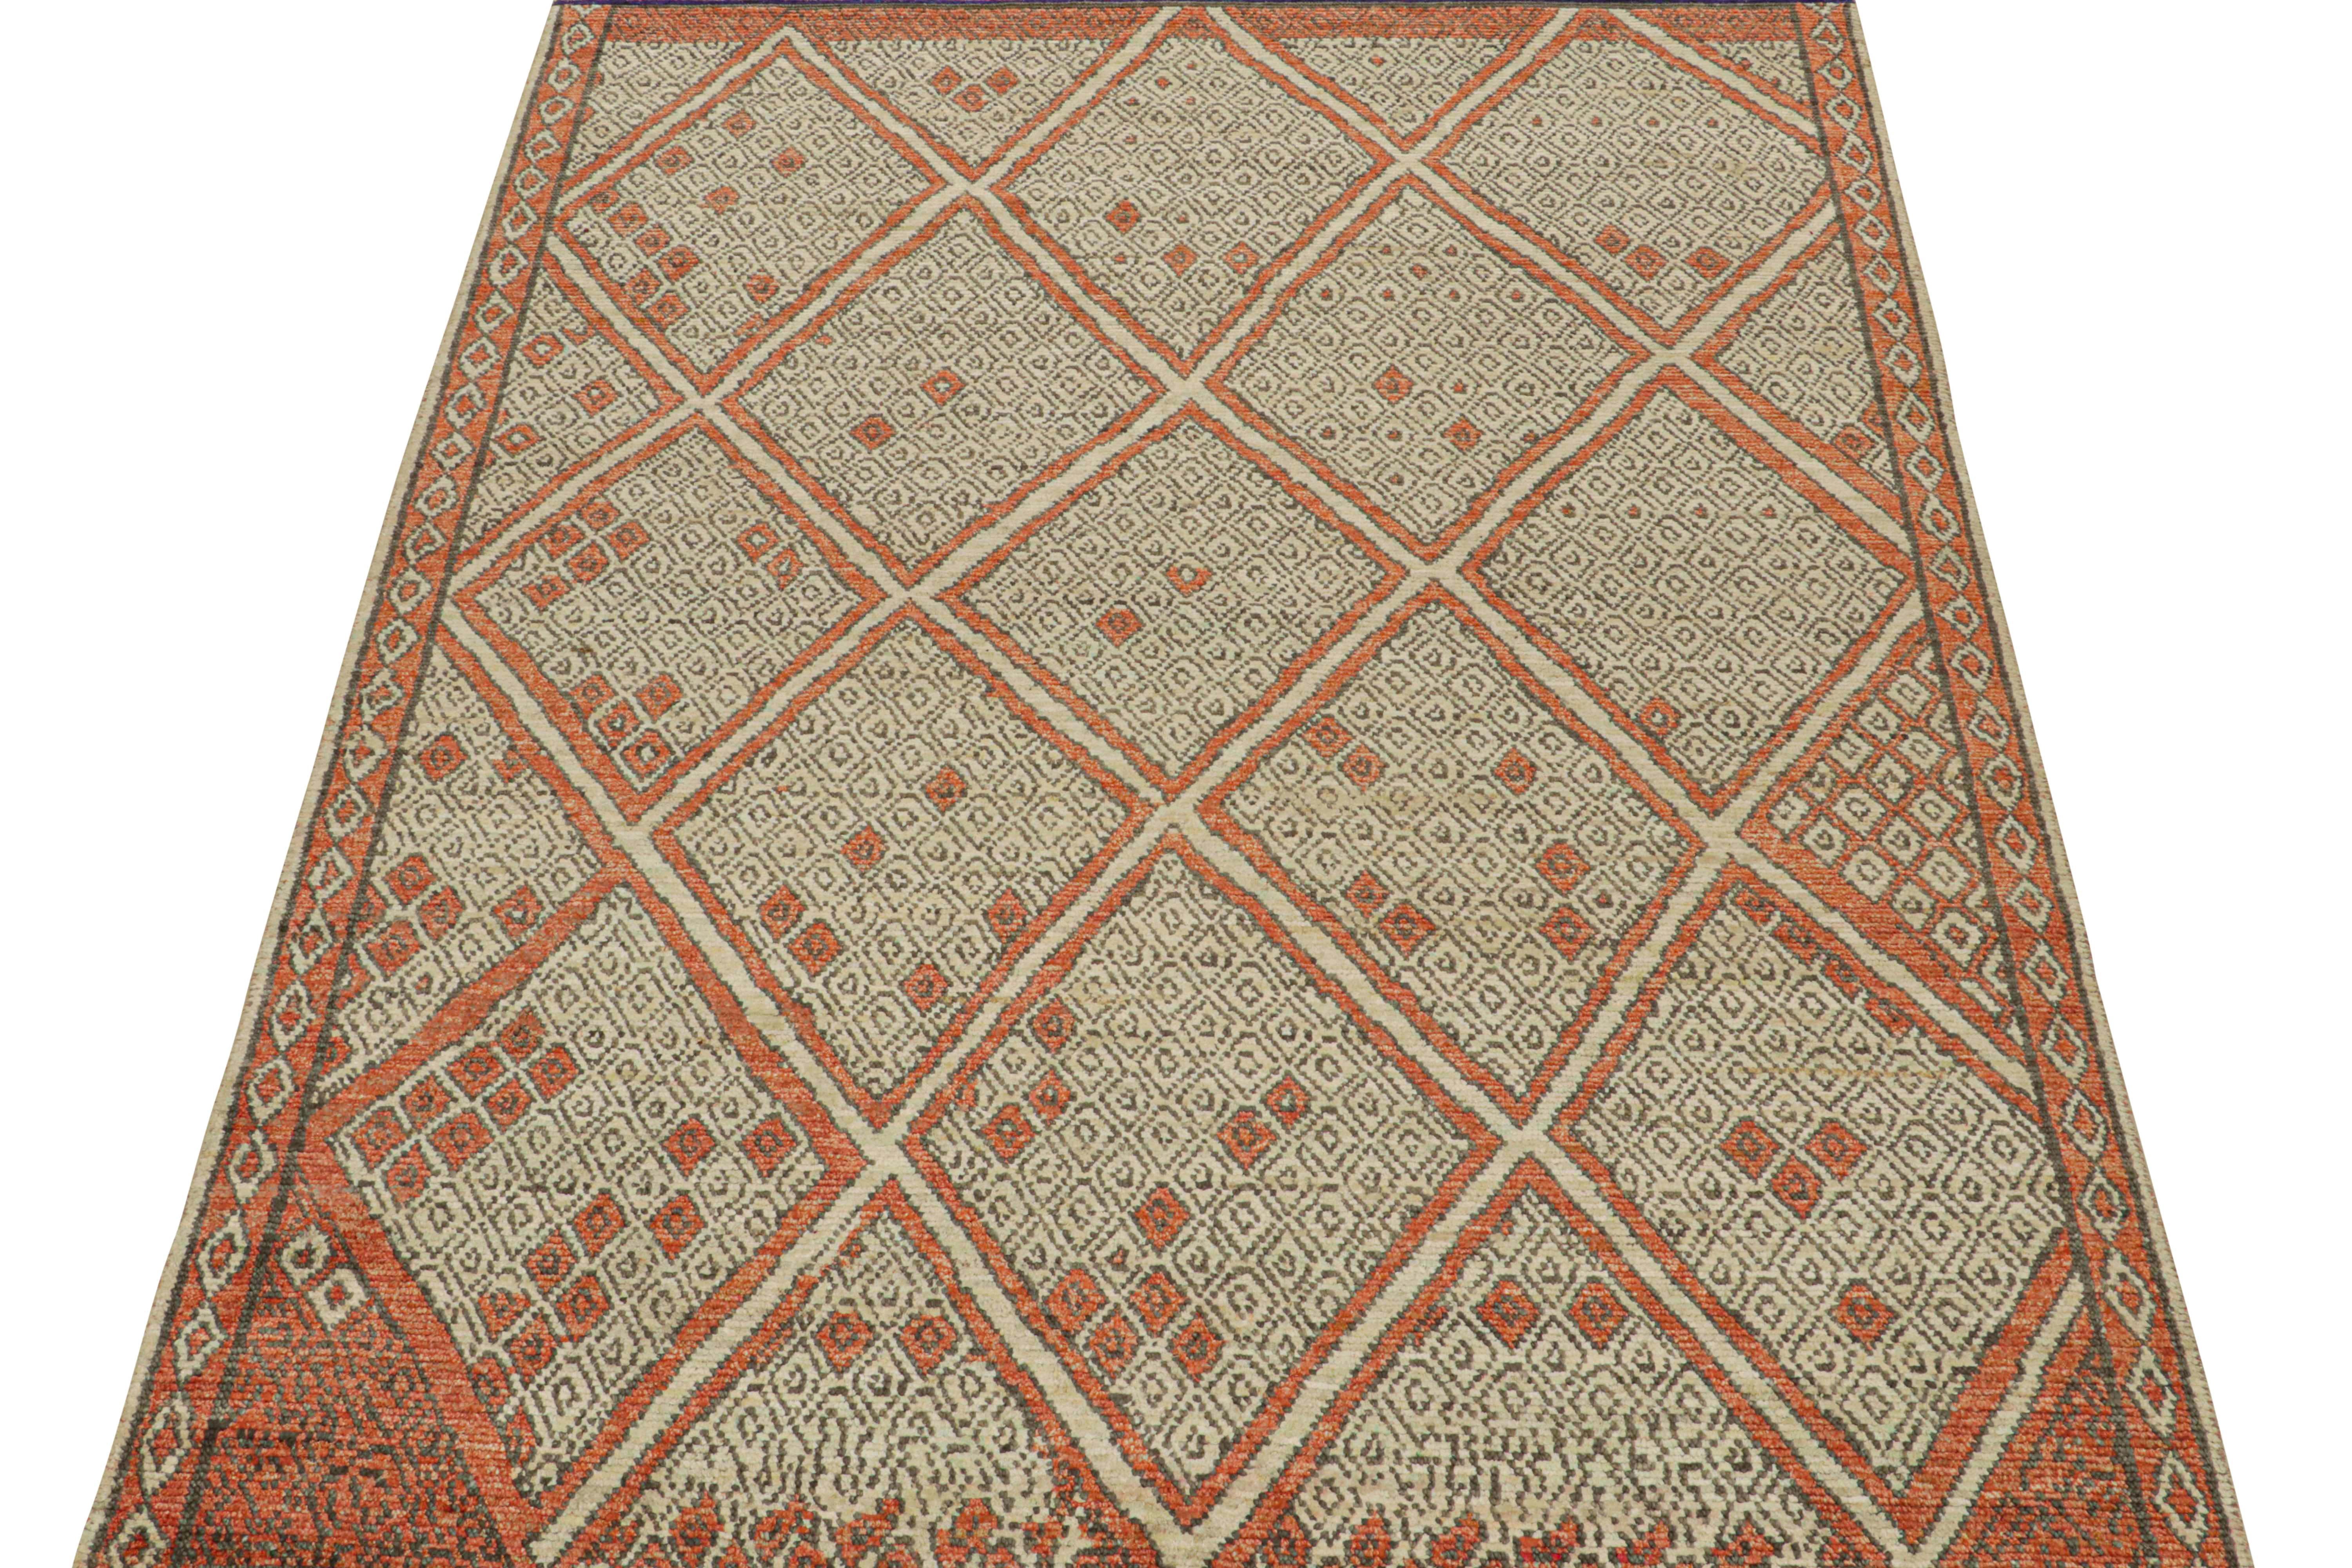 This 8x10 rug is a new addition to Rug & Kilim’s Moroccan rug collection. Hand-knotted in wool and silk, its design recaptures the classic tribal sensibility in a new modern quality.

This particular design enjoys geometric patterns, and an